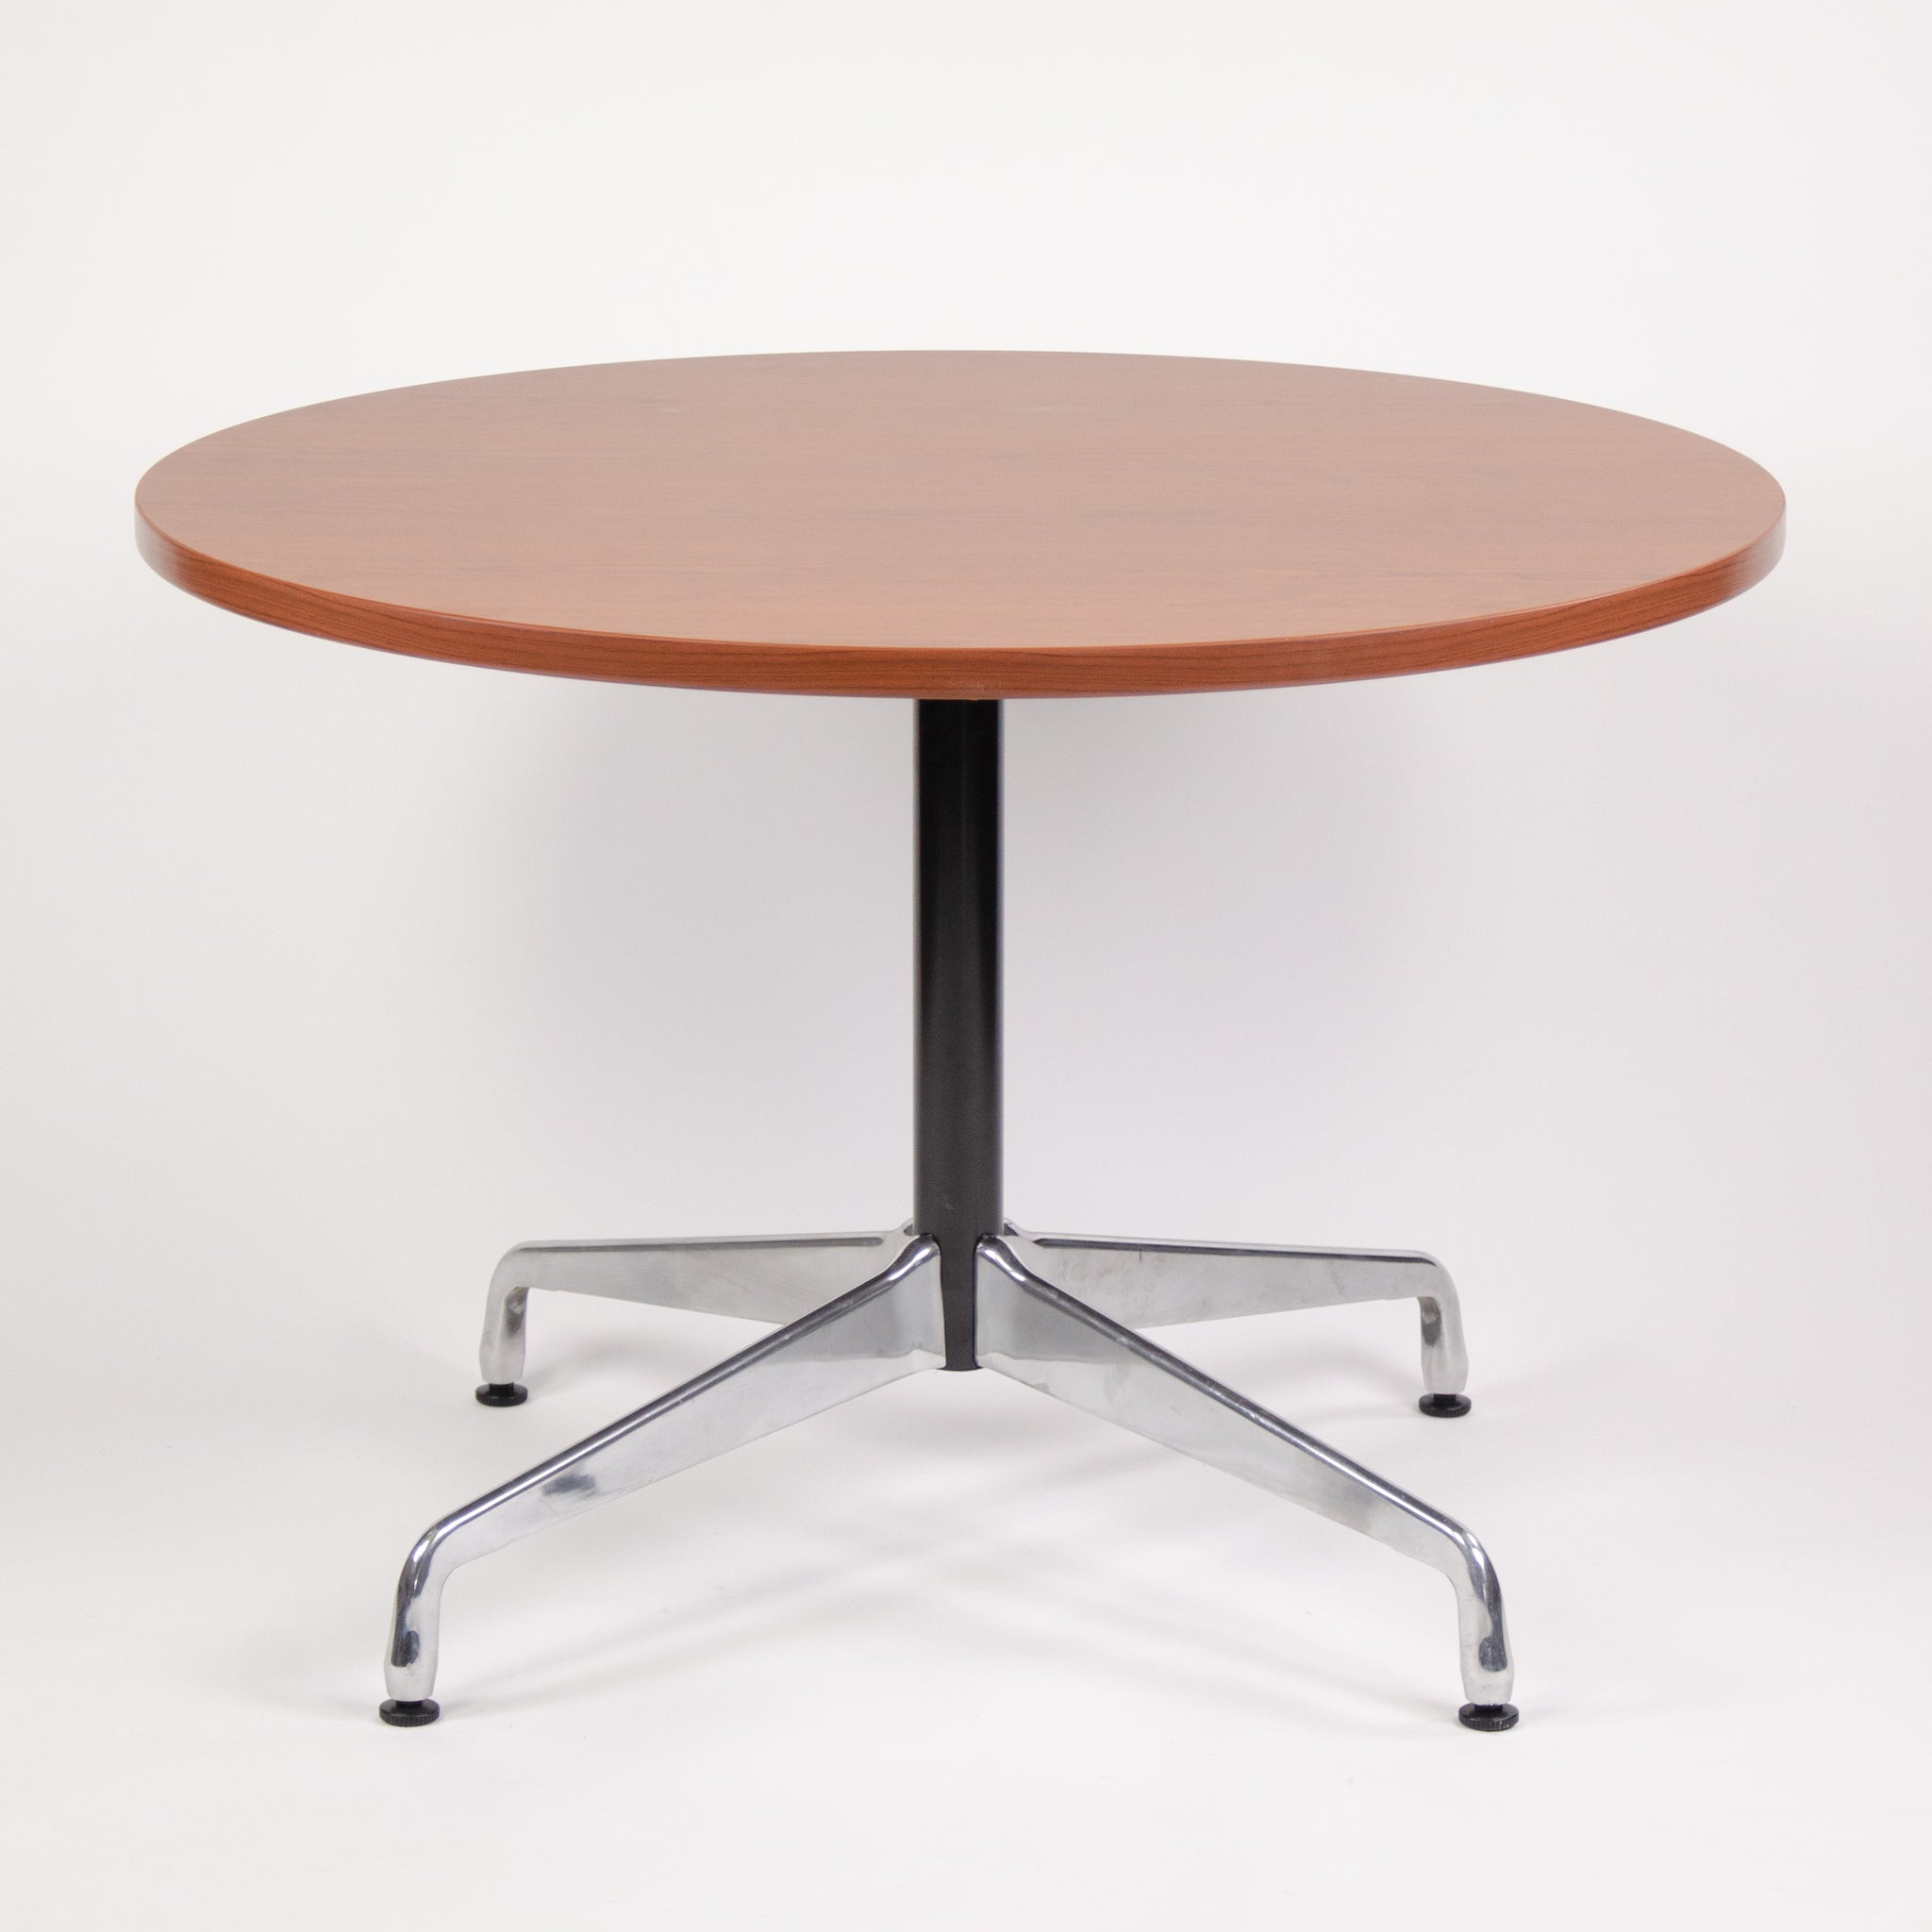 SOLD Eames Herman Miller Aluminum Group Segmented Dining Cafe Conference Table MINT